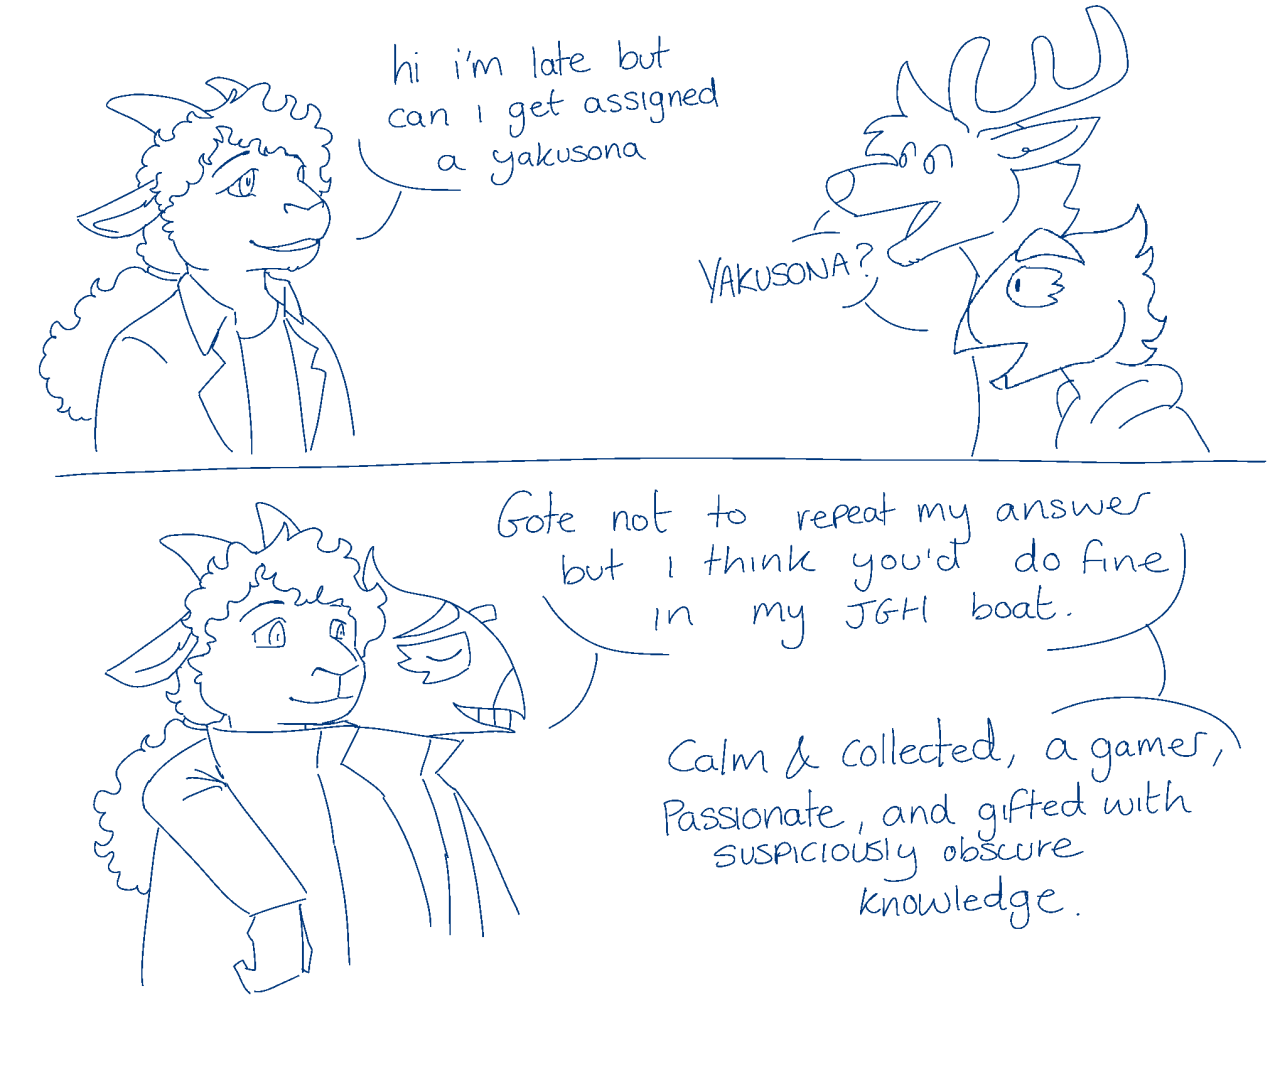 Panel 1: A new character enters the scene, a goat (Gote). They ask: 'Hi i'm late but can i get assigned a yaku-sona'. Fiz and Goose are drawn comedically with mouths agape, saying 'YAKU-SONA?' in unison. Panel 2: Goose puts an arm over Gote's shoulder with a smug expression. Both characters are wearing Joongi Han's outfit from 7 now. Goose speaks: 'Gote not to repeat my answer but i think you'd do fine in my J G H boat. Calm & collected, a gamer, passionate, and gifted with suspiciously obscure knowledge.'